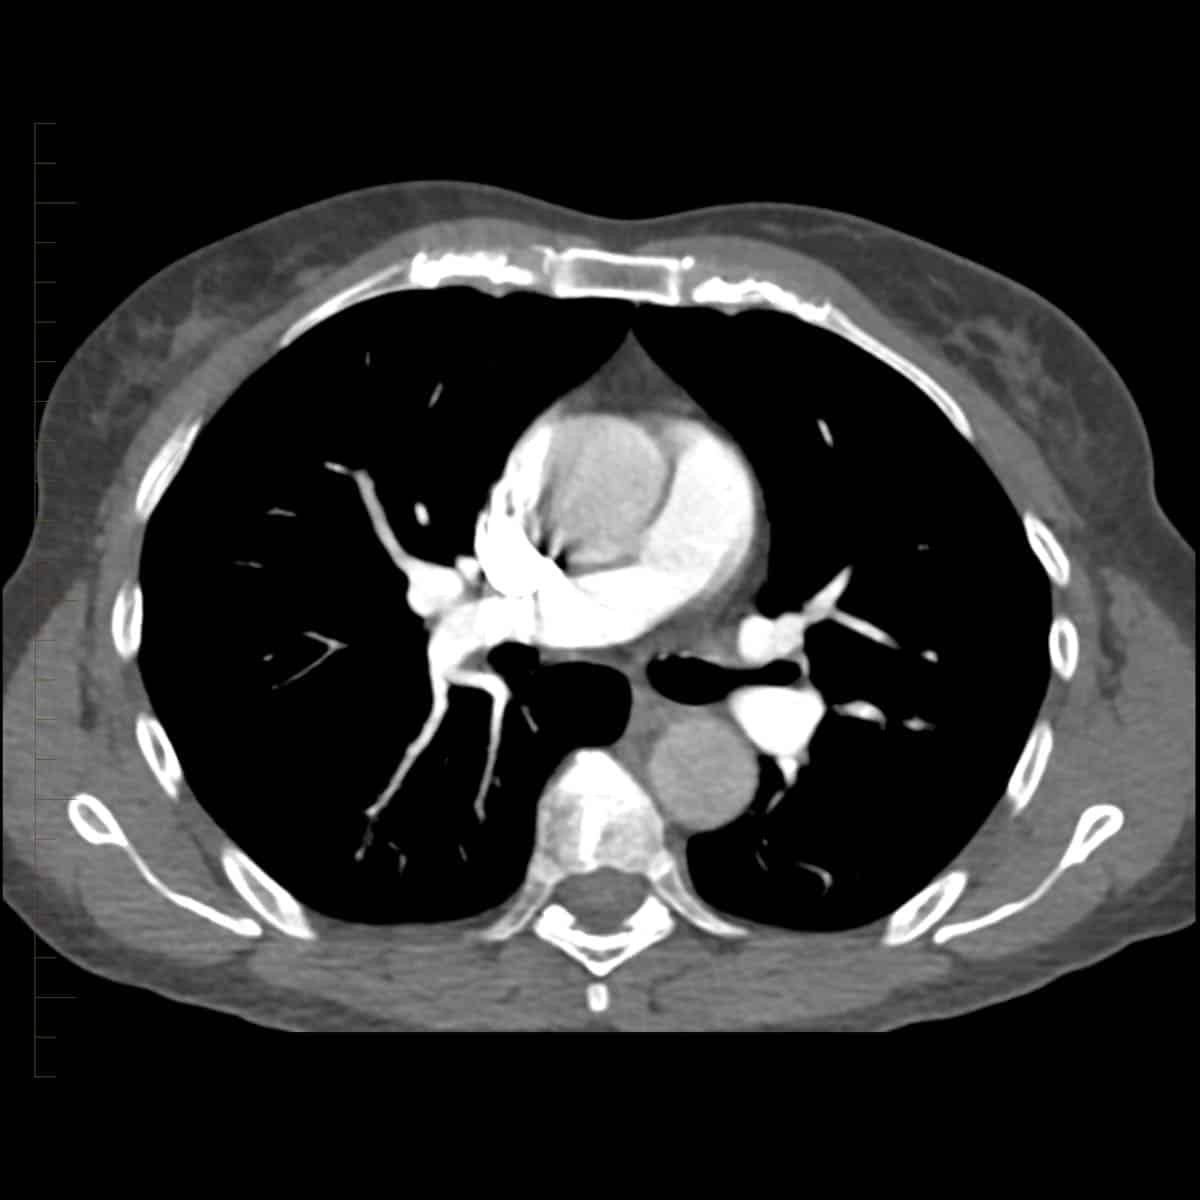 CT scan of a pulmonary angiogram